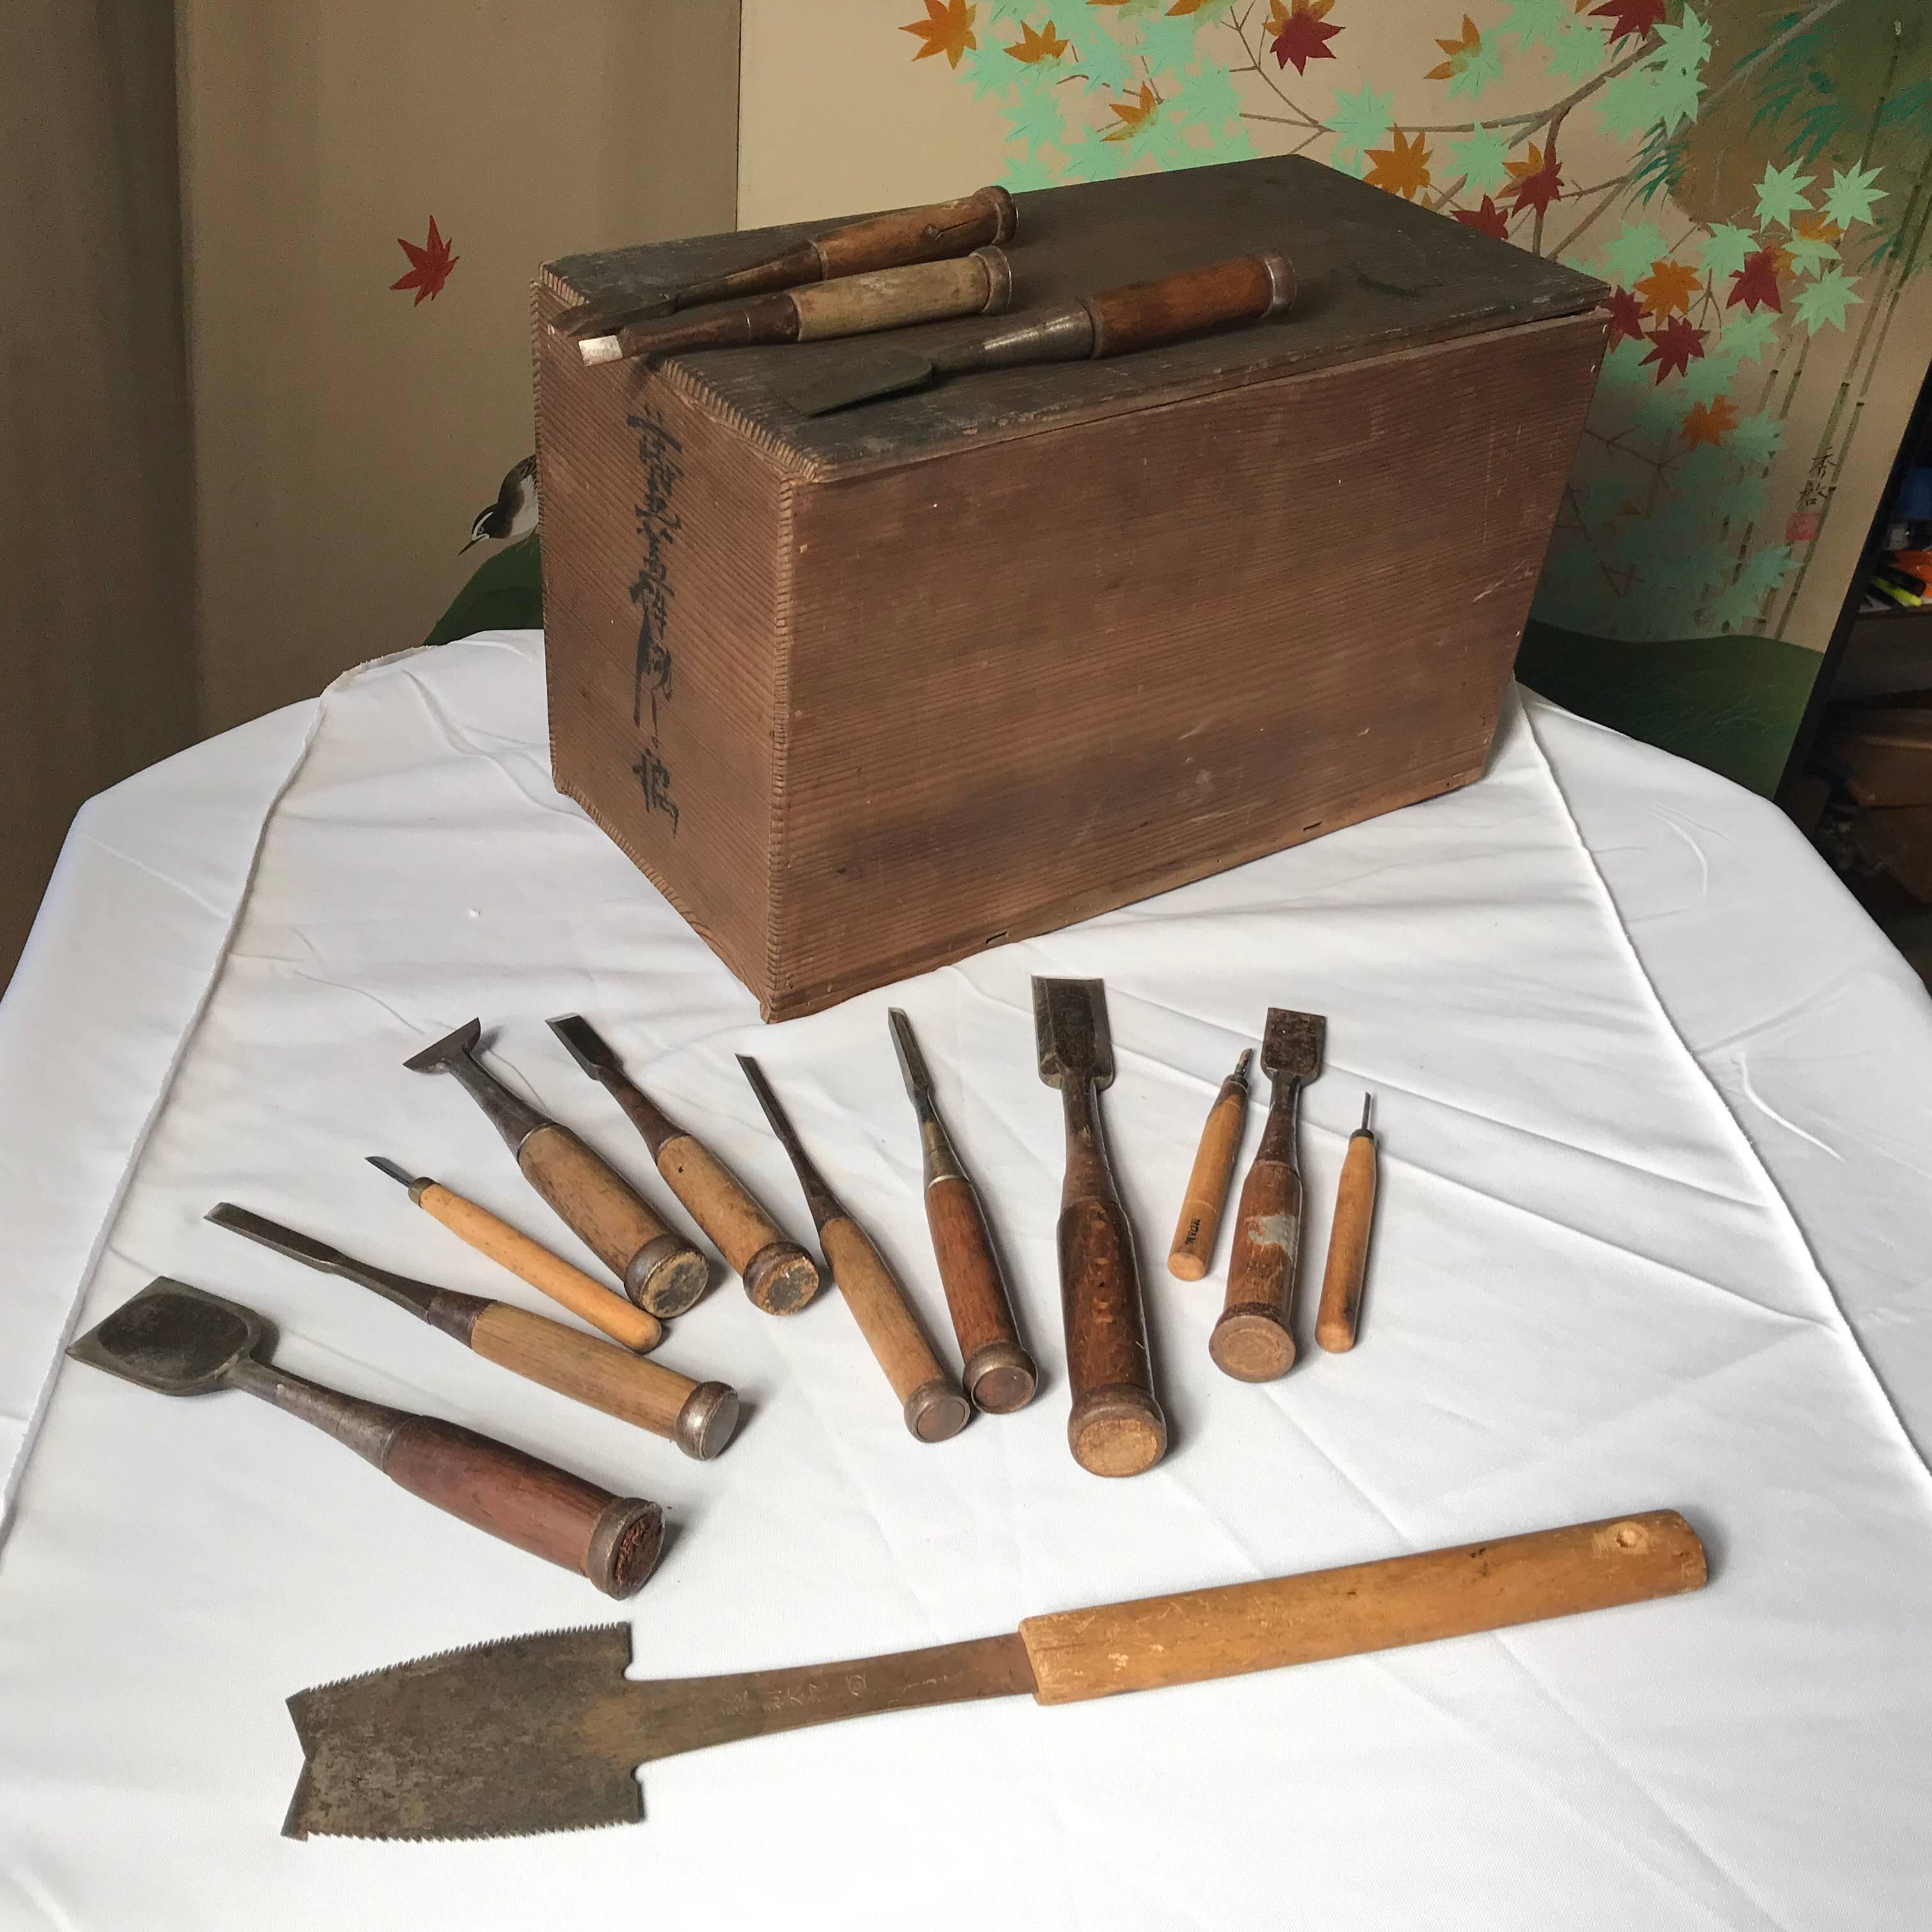 Here's a rare find from a collector we visited in Japan. A very unusual treasure from Japan. 

This is a cache box of 15 Old Japanese professional carpenter's carving and chisel tools, including fine tataki nomi timber chisels, dating back to the